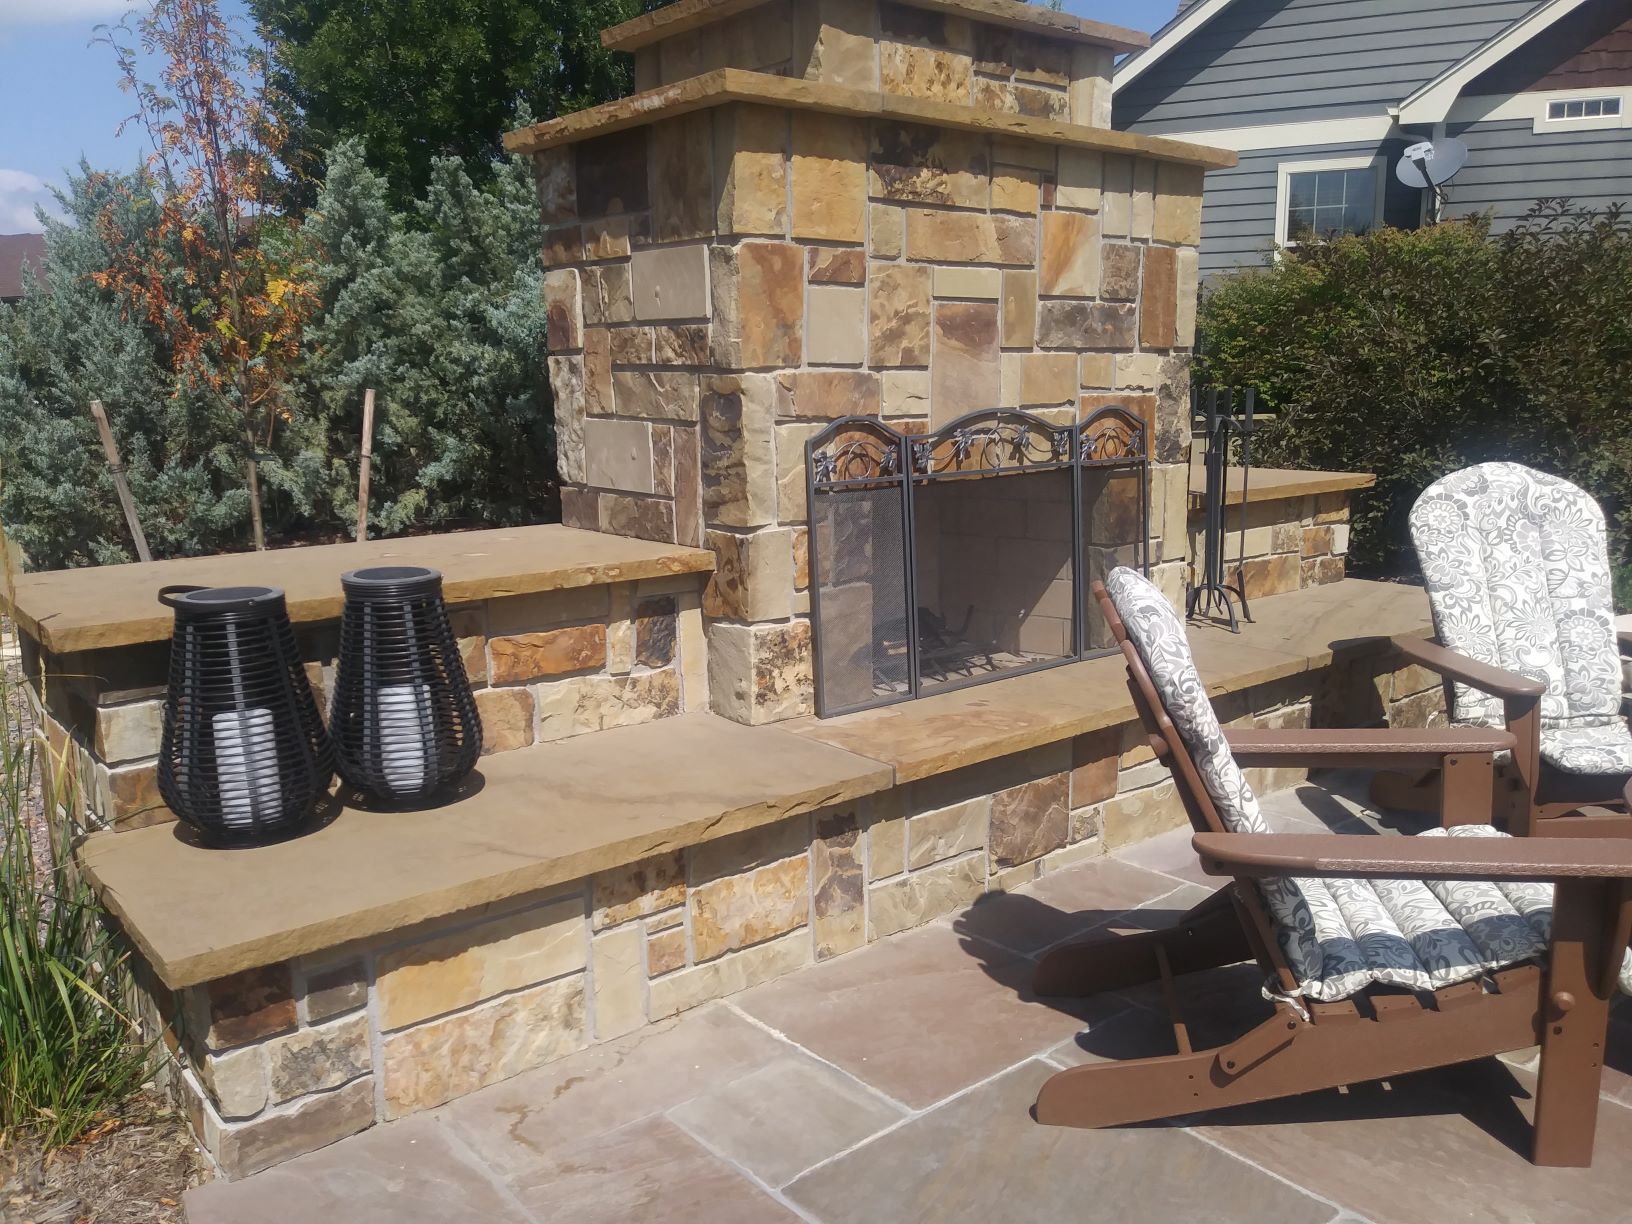 Outdoor Fireplace with large stone chimney and seating area in front.